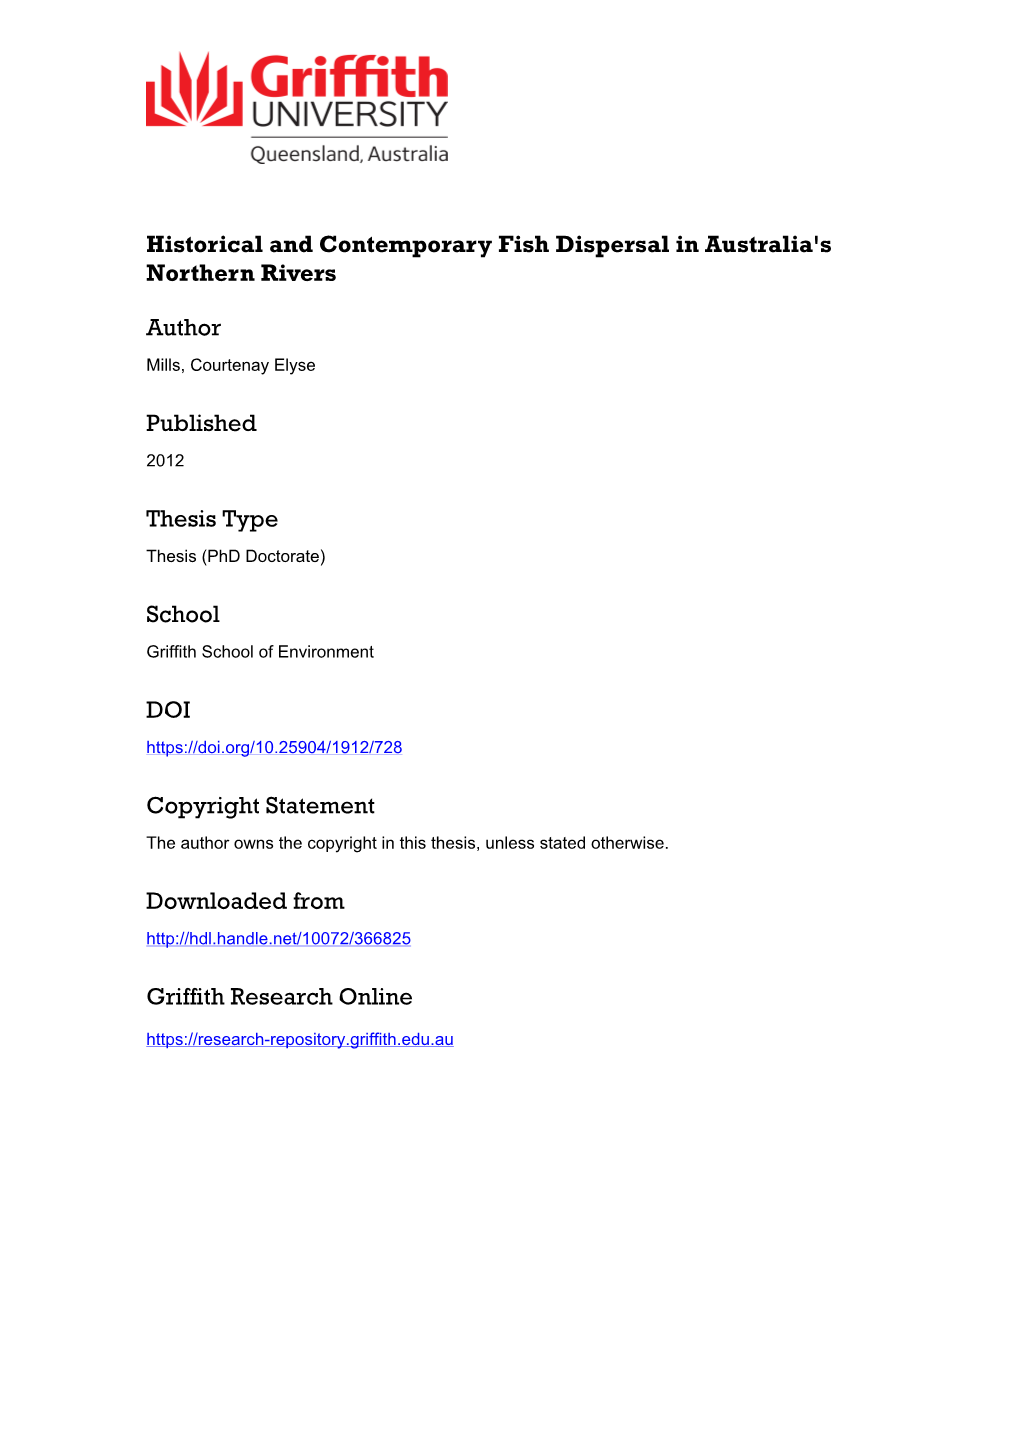 Historical and Contemporary Fish Dispersal in Australia's Northern Rivers